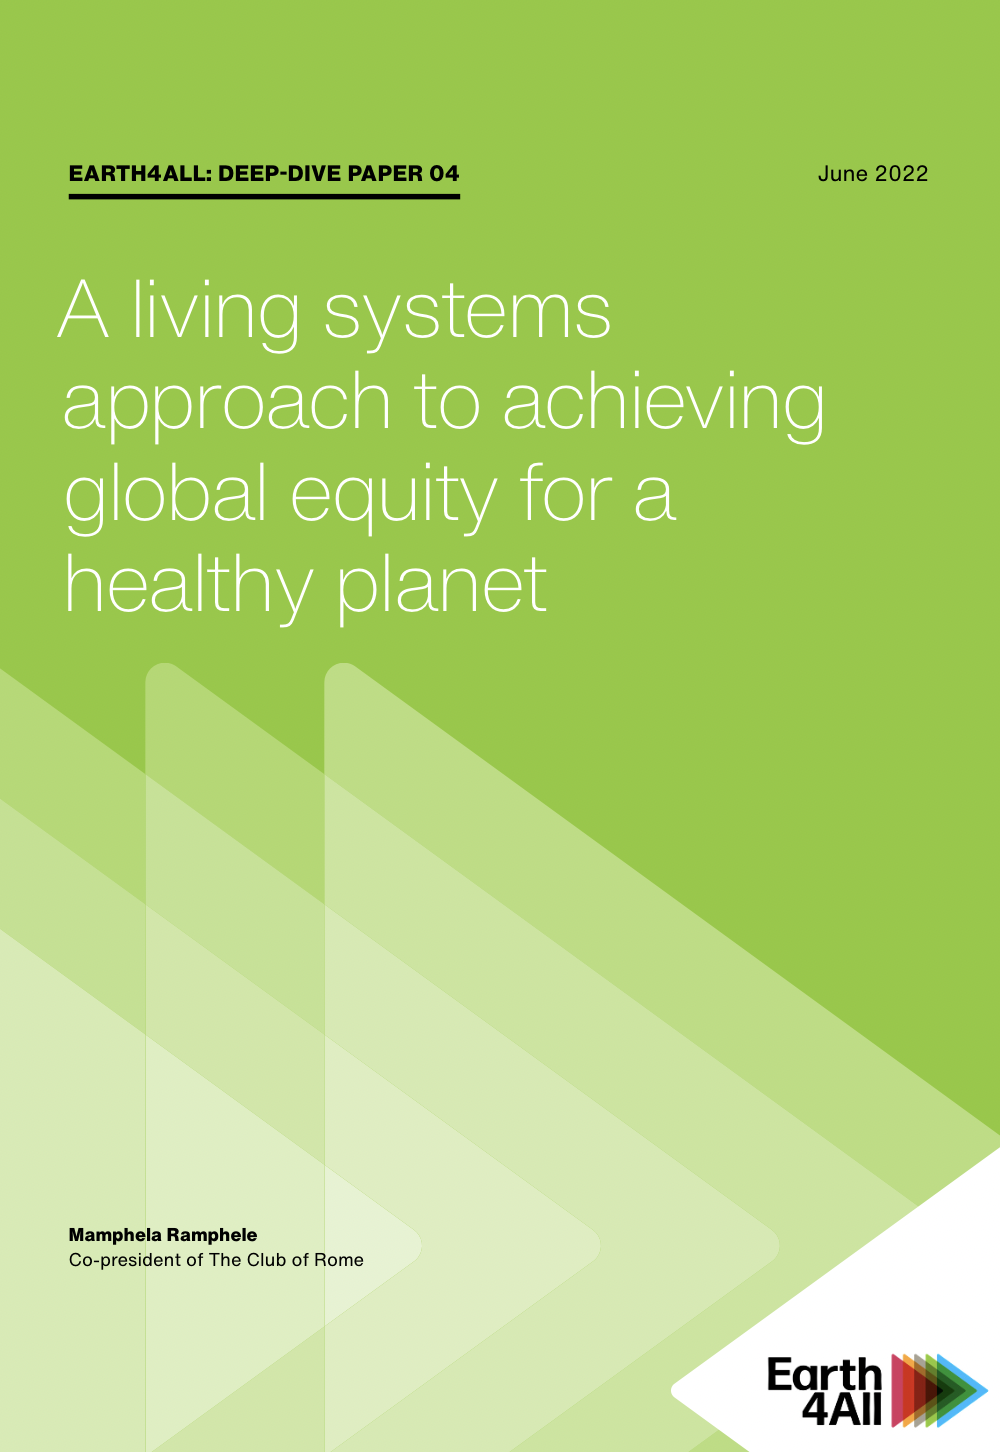 A living systems approach to achieving global equity for a healthy planet